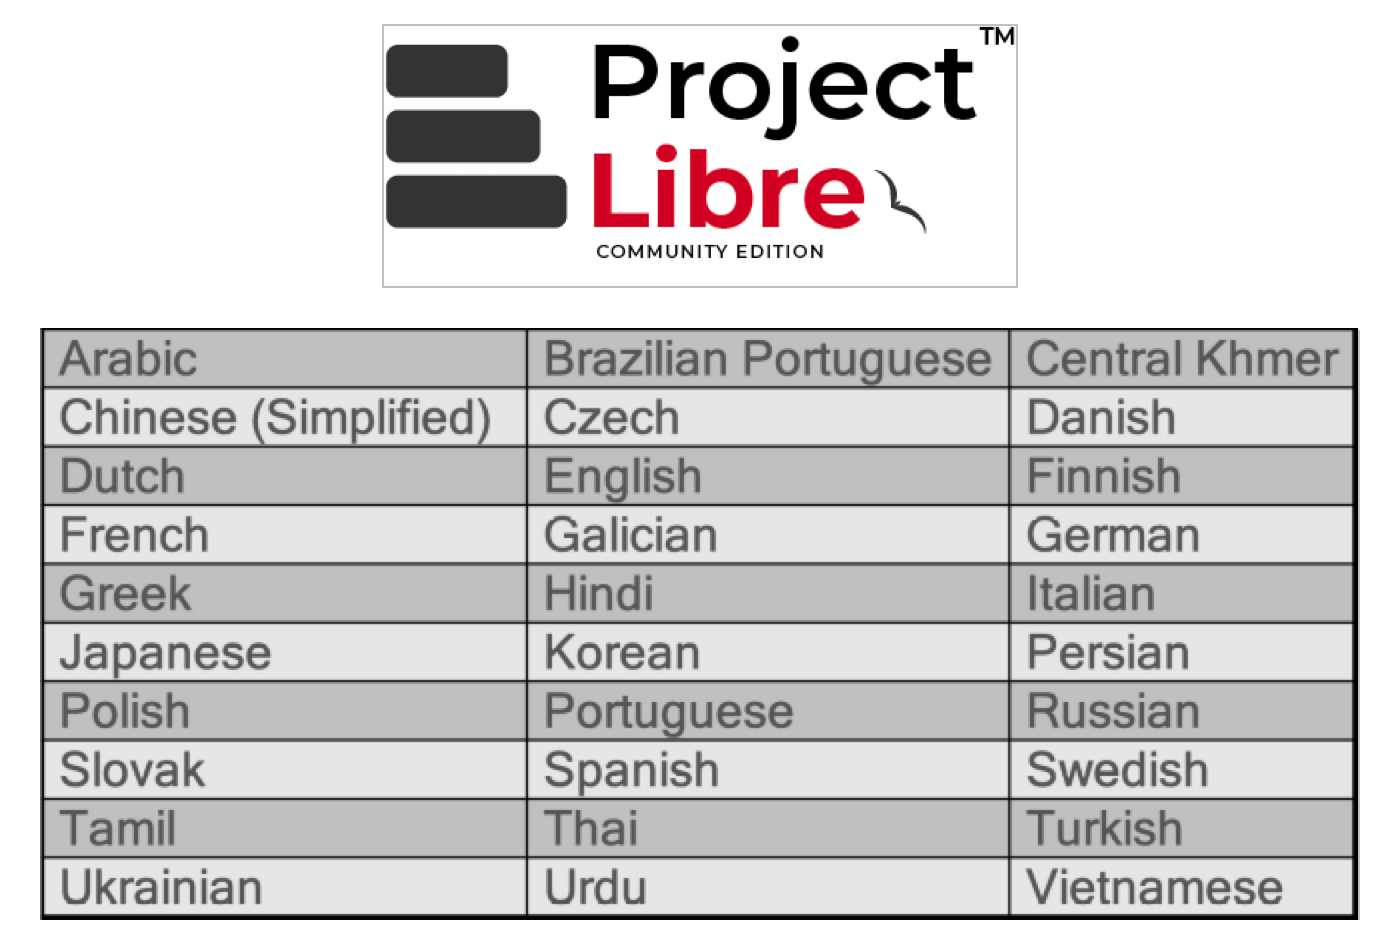 ProjectLibre languages